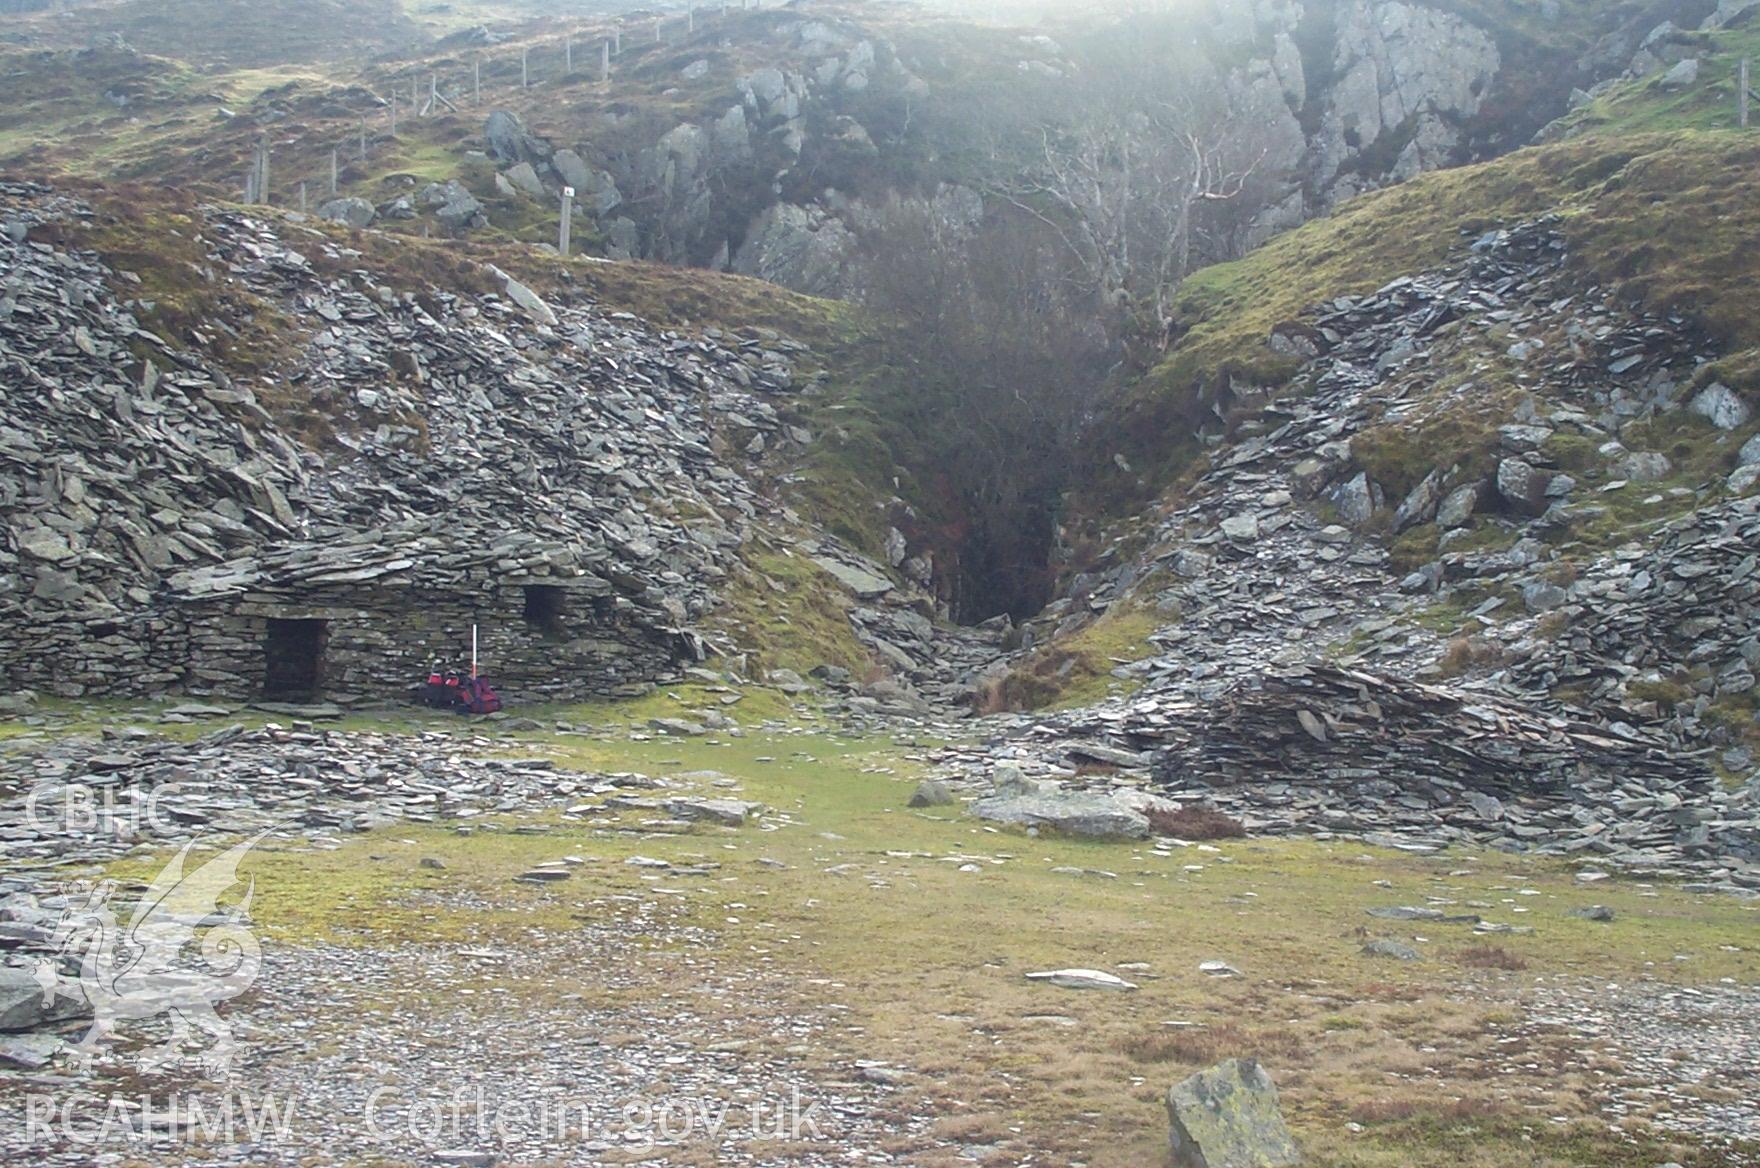 Digital photograph of Tal-y-fan Slate Quarry from the West. Taken by P. Schofield on 19/02/2004 during the Eastern Snowdonia (North) Upland Survey.